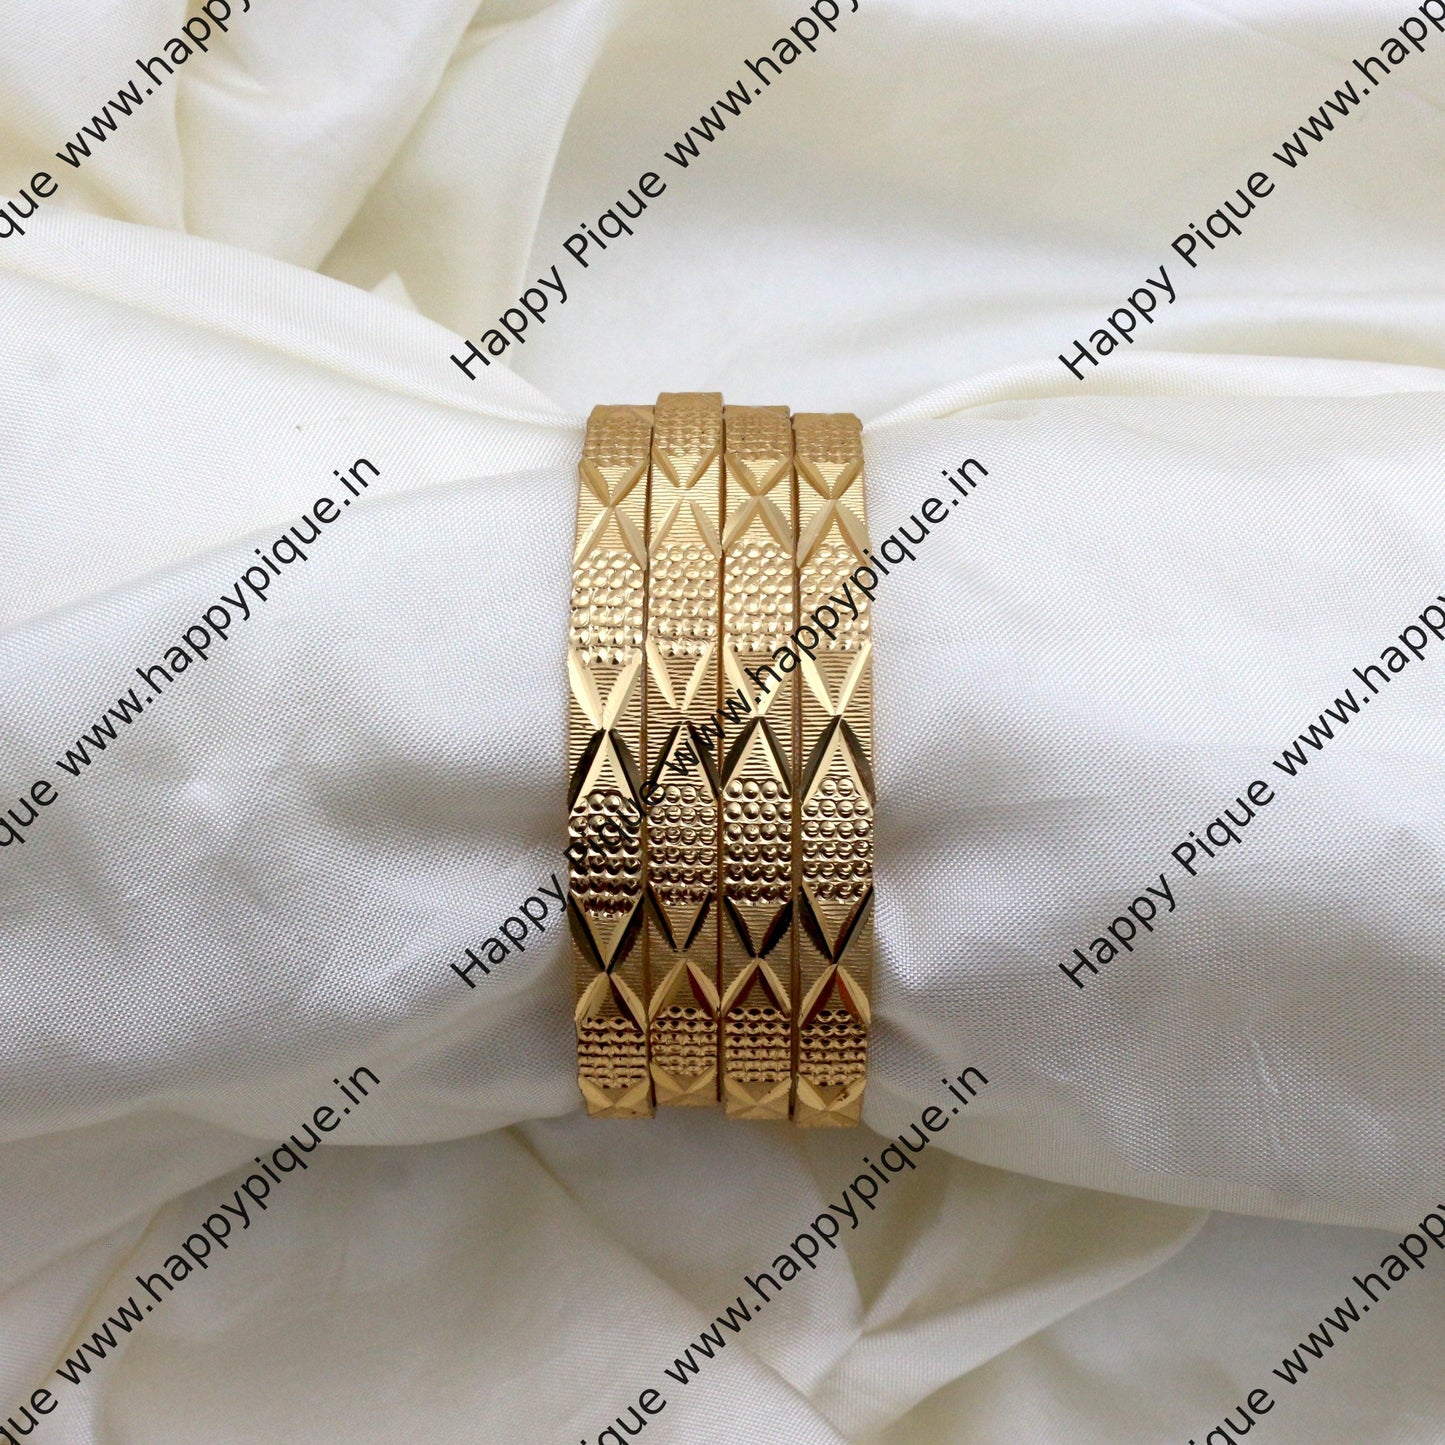 Real Gold Tone Set of 4 Bangles - SS019 - Daily Wear/Office Wear/Function Wear Bangles